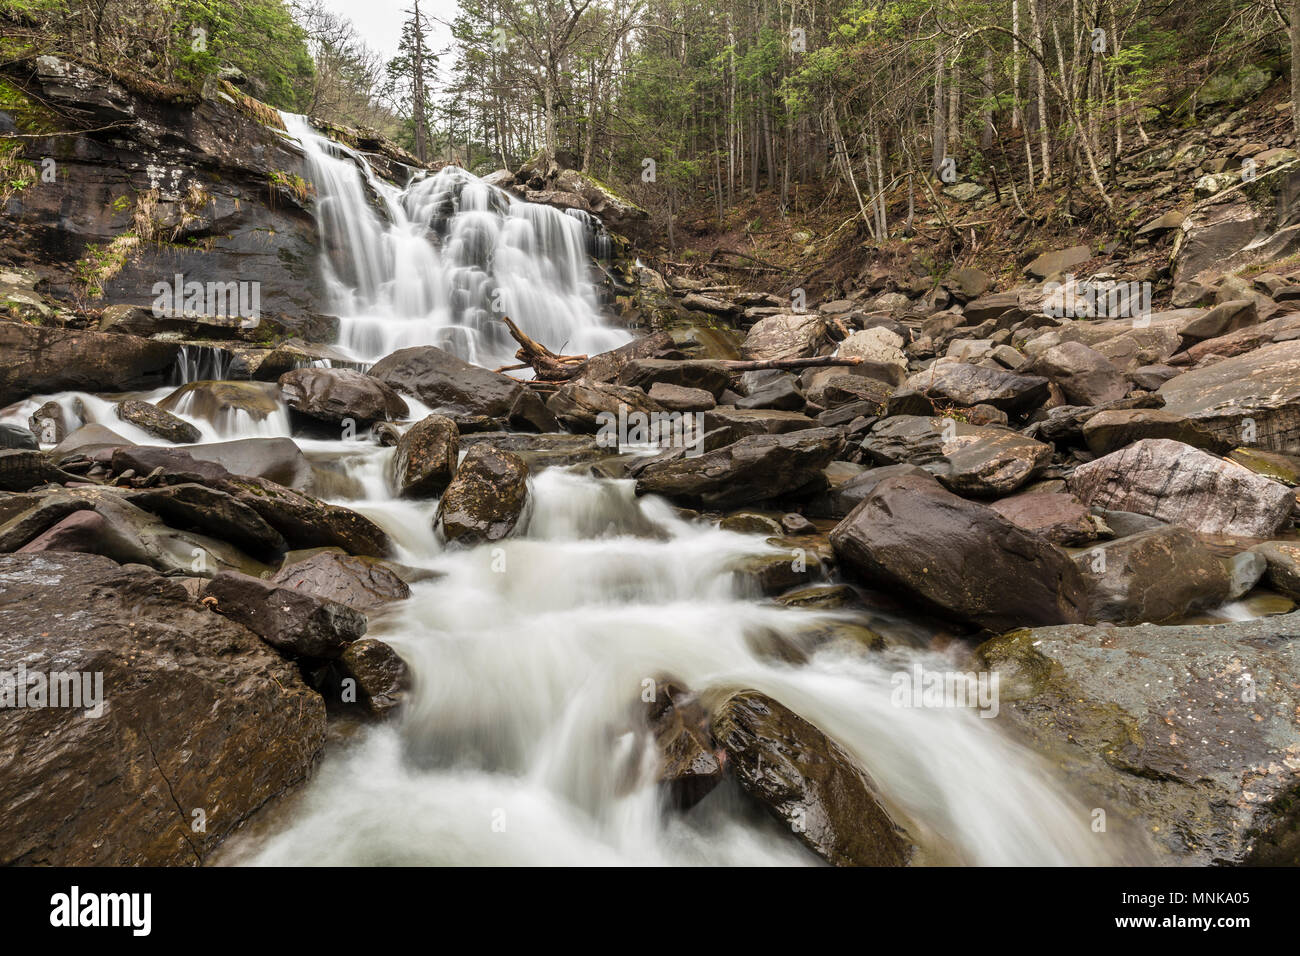 Heavy Spring water flow over Bastion Falls on Spruce Creek, downstream from Kaaterskill Falls off Route 23A in Haines Falls, New York. Stock Photo